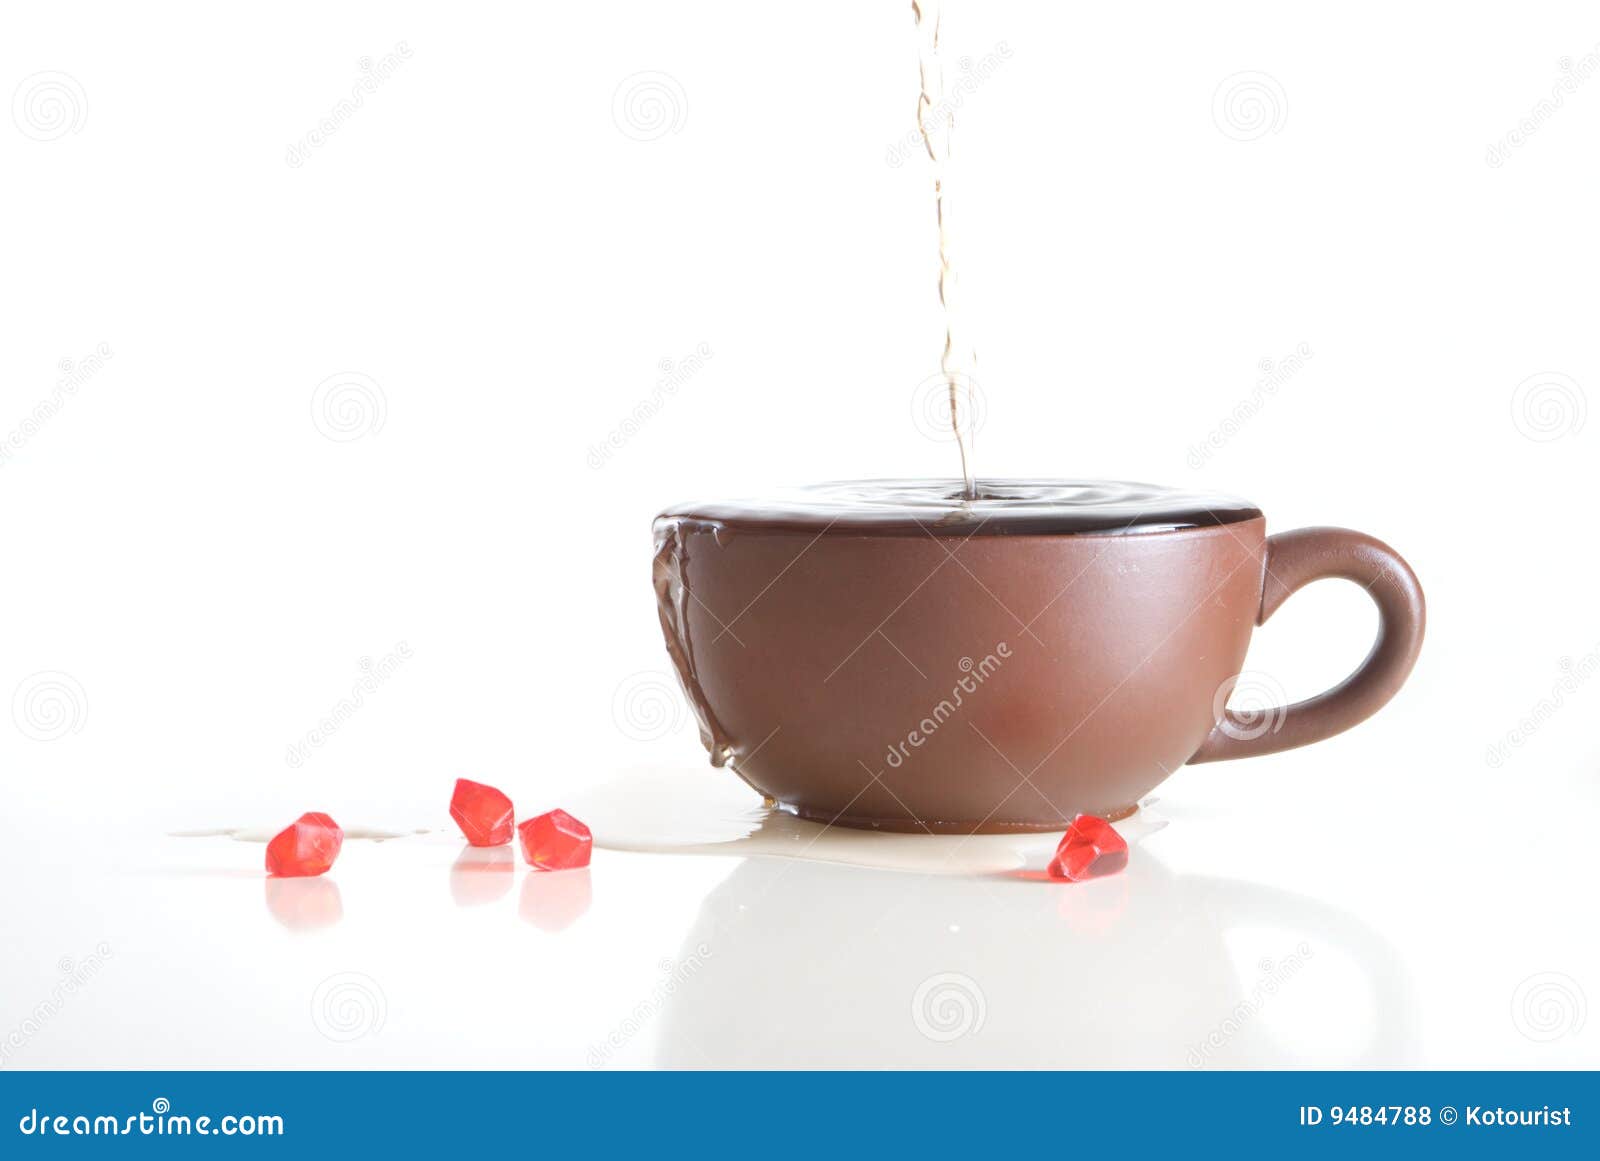 cup overflowing clipart - photo #16